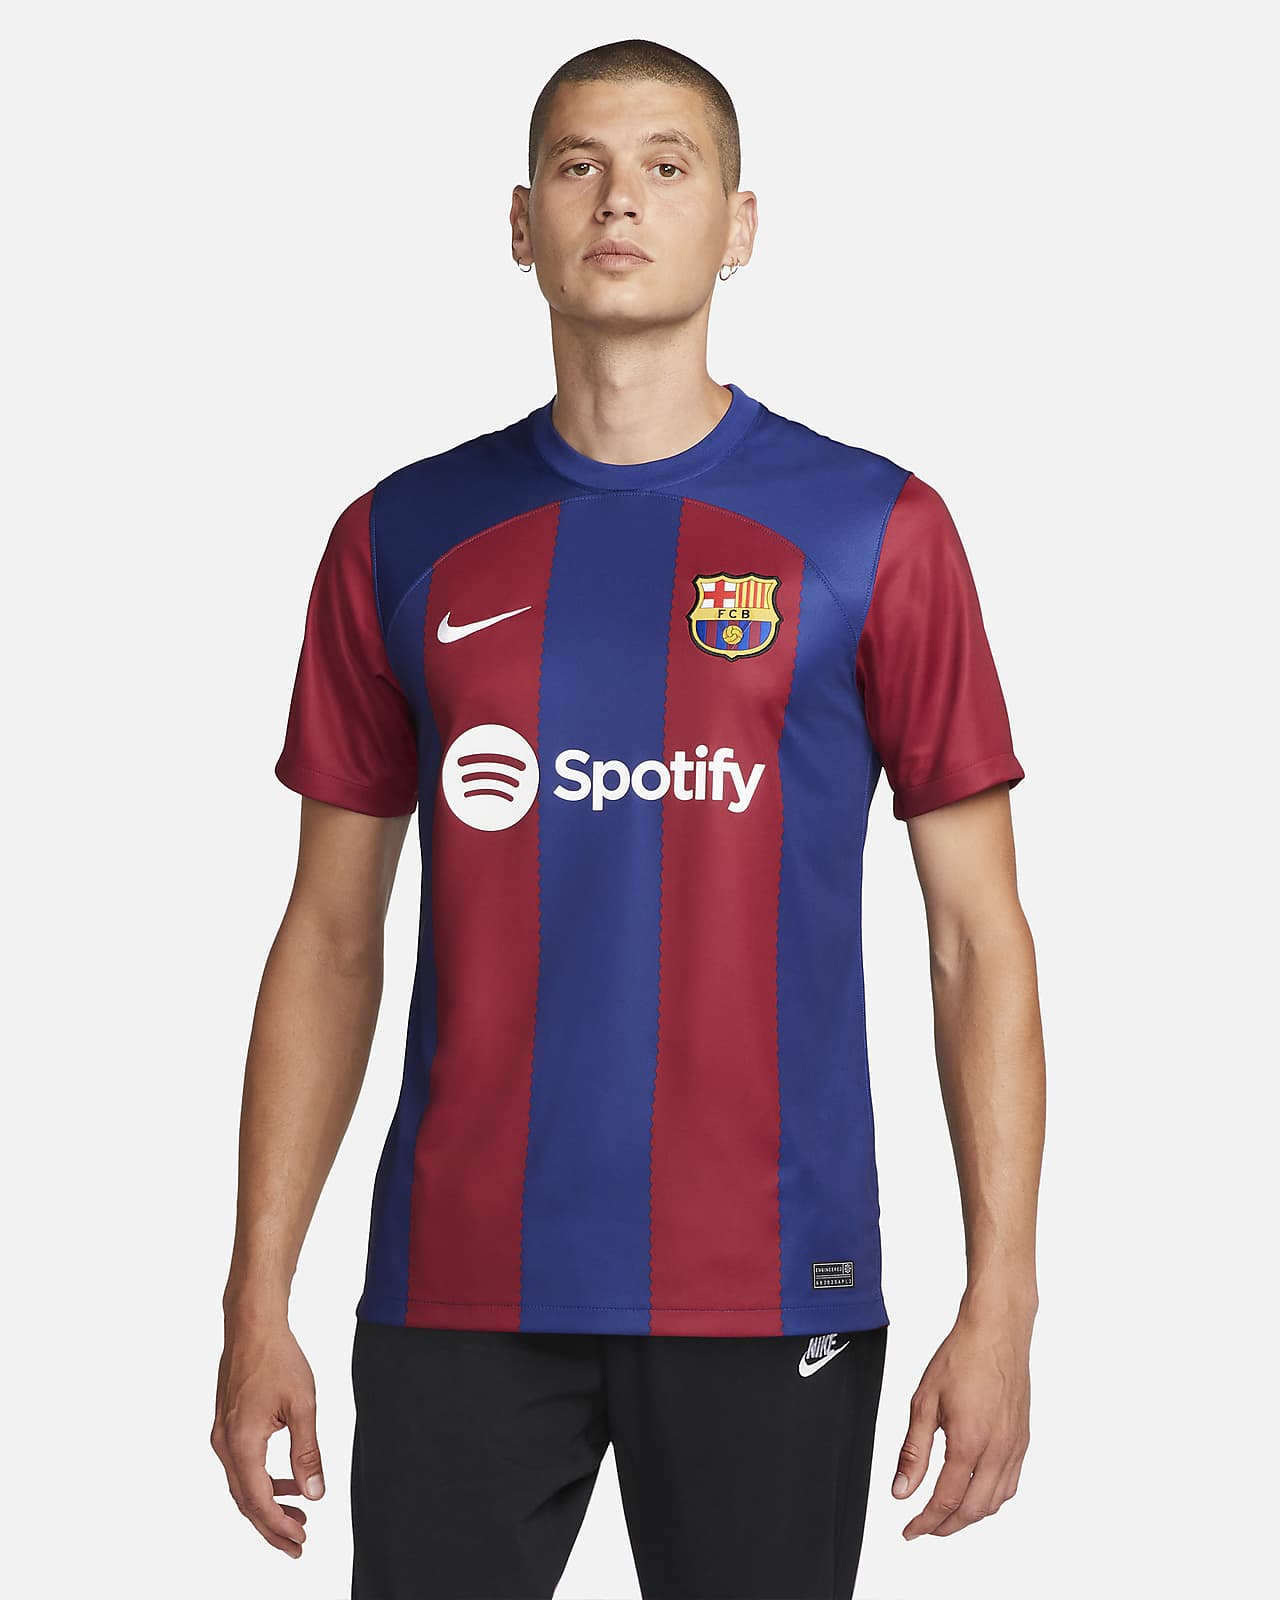 fc barcelone maillot